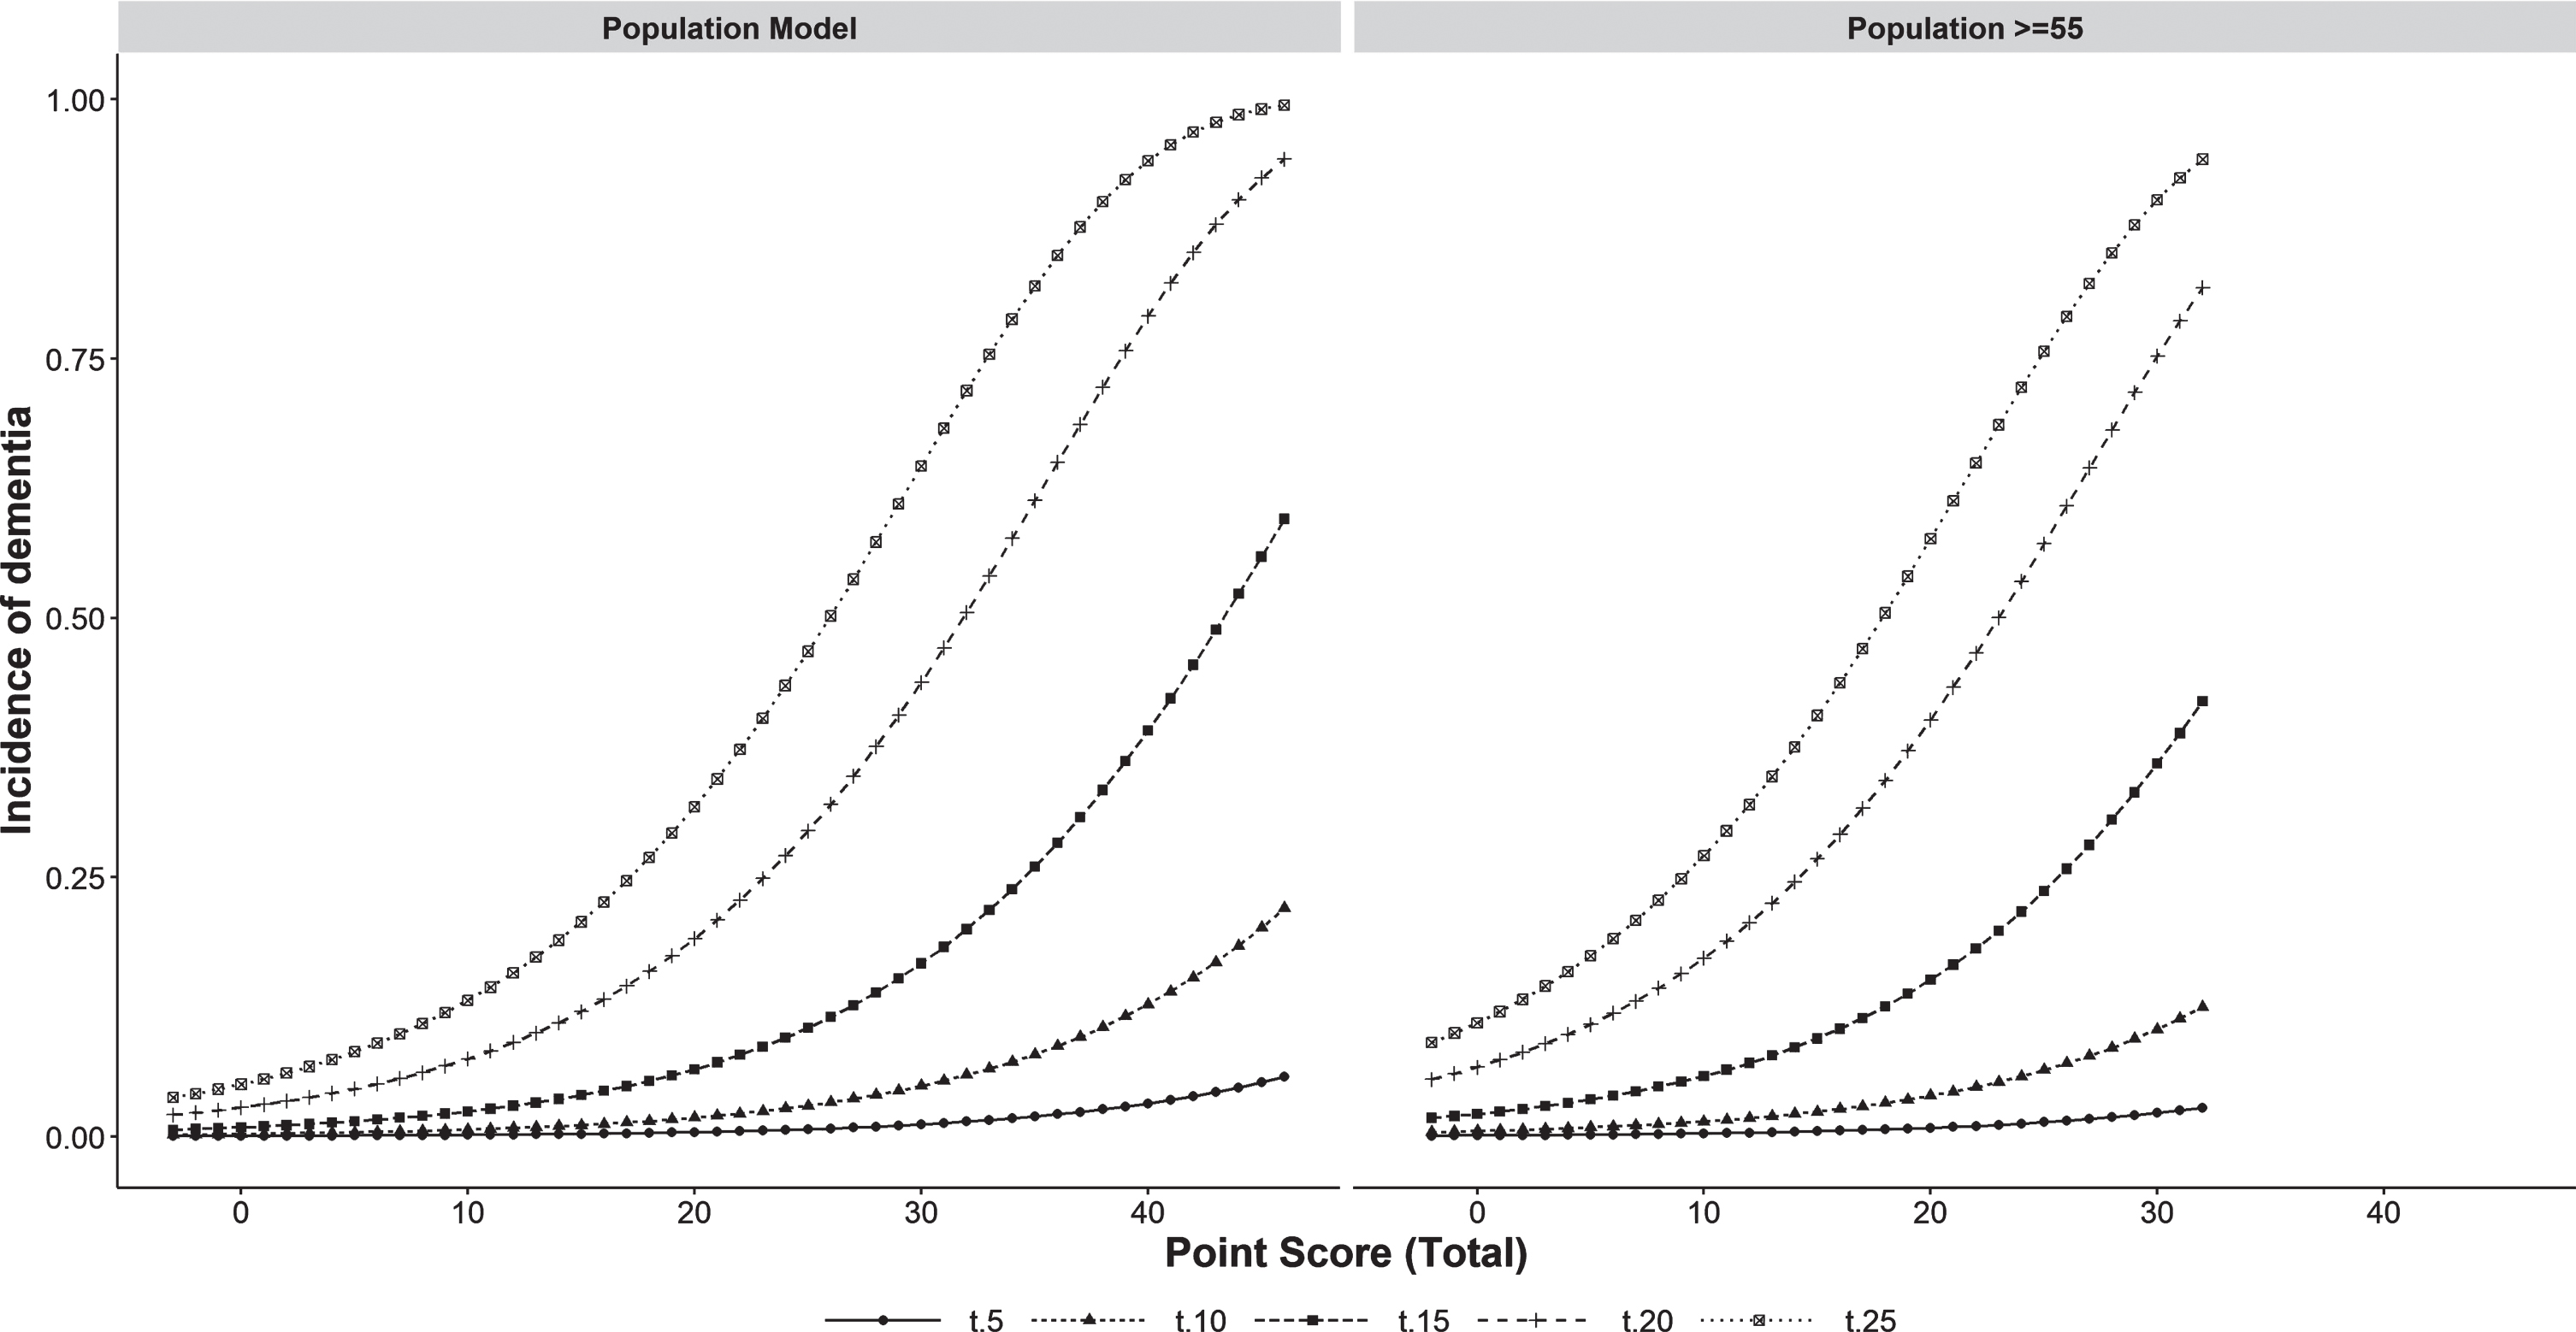 Incidence of dementia for the different levels of scores by length of follow-up (5, 10, 15, 20, 25 years) in the whole population and in people≥55 years of age. t5, t10, t15, t20, t25 : 5, 10, 15, 20, 25 years of follow-up.